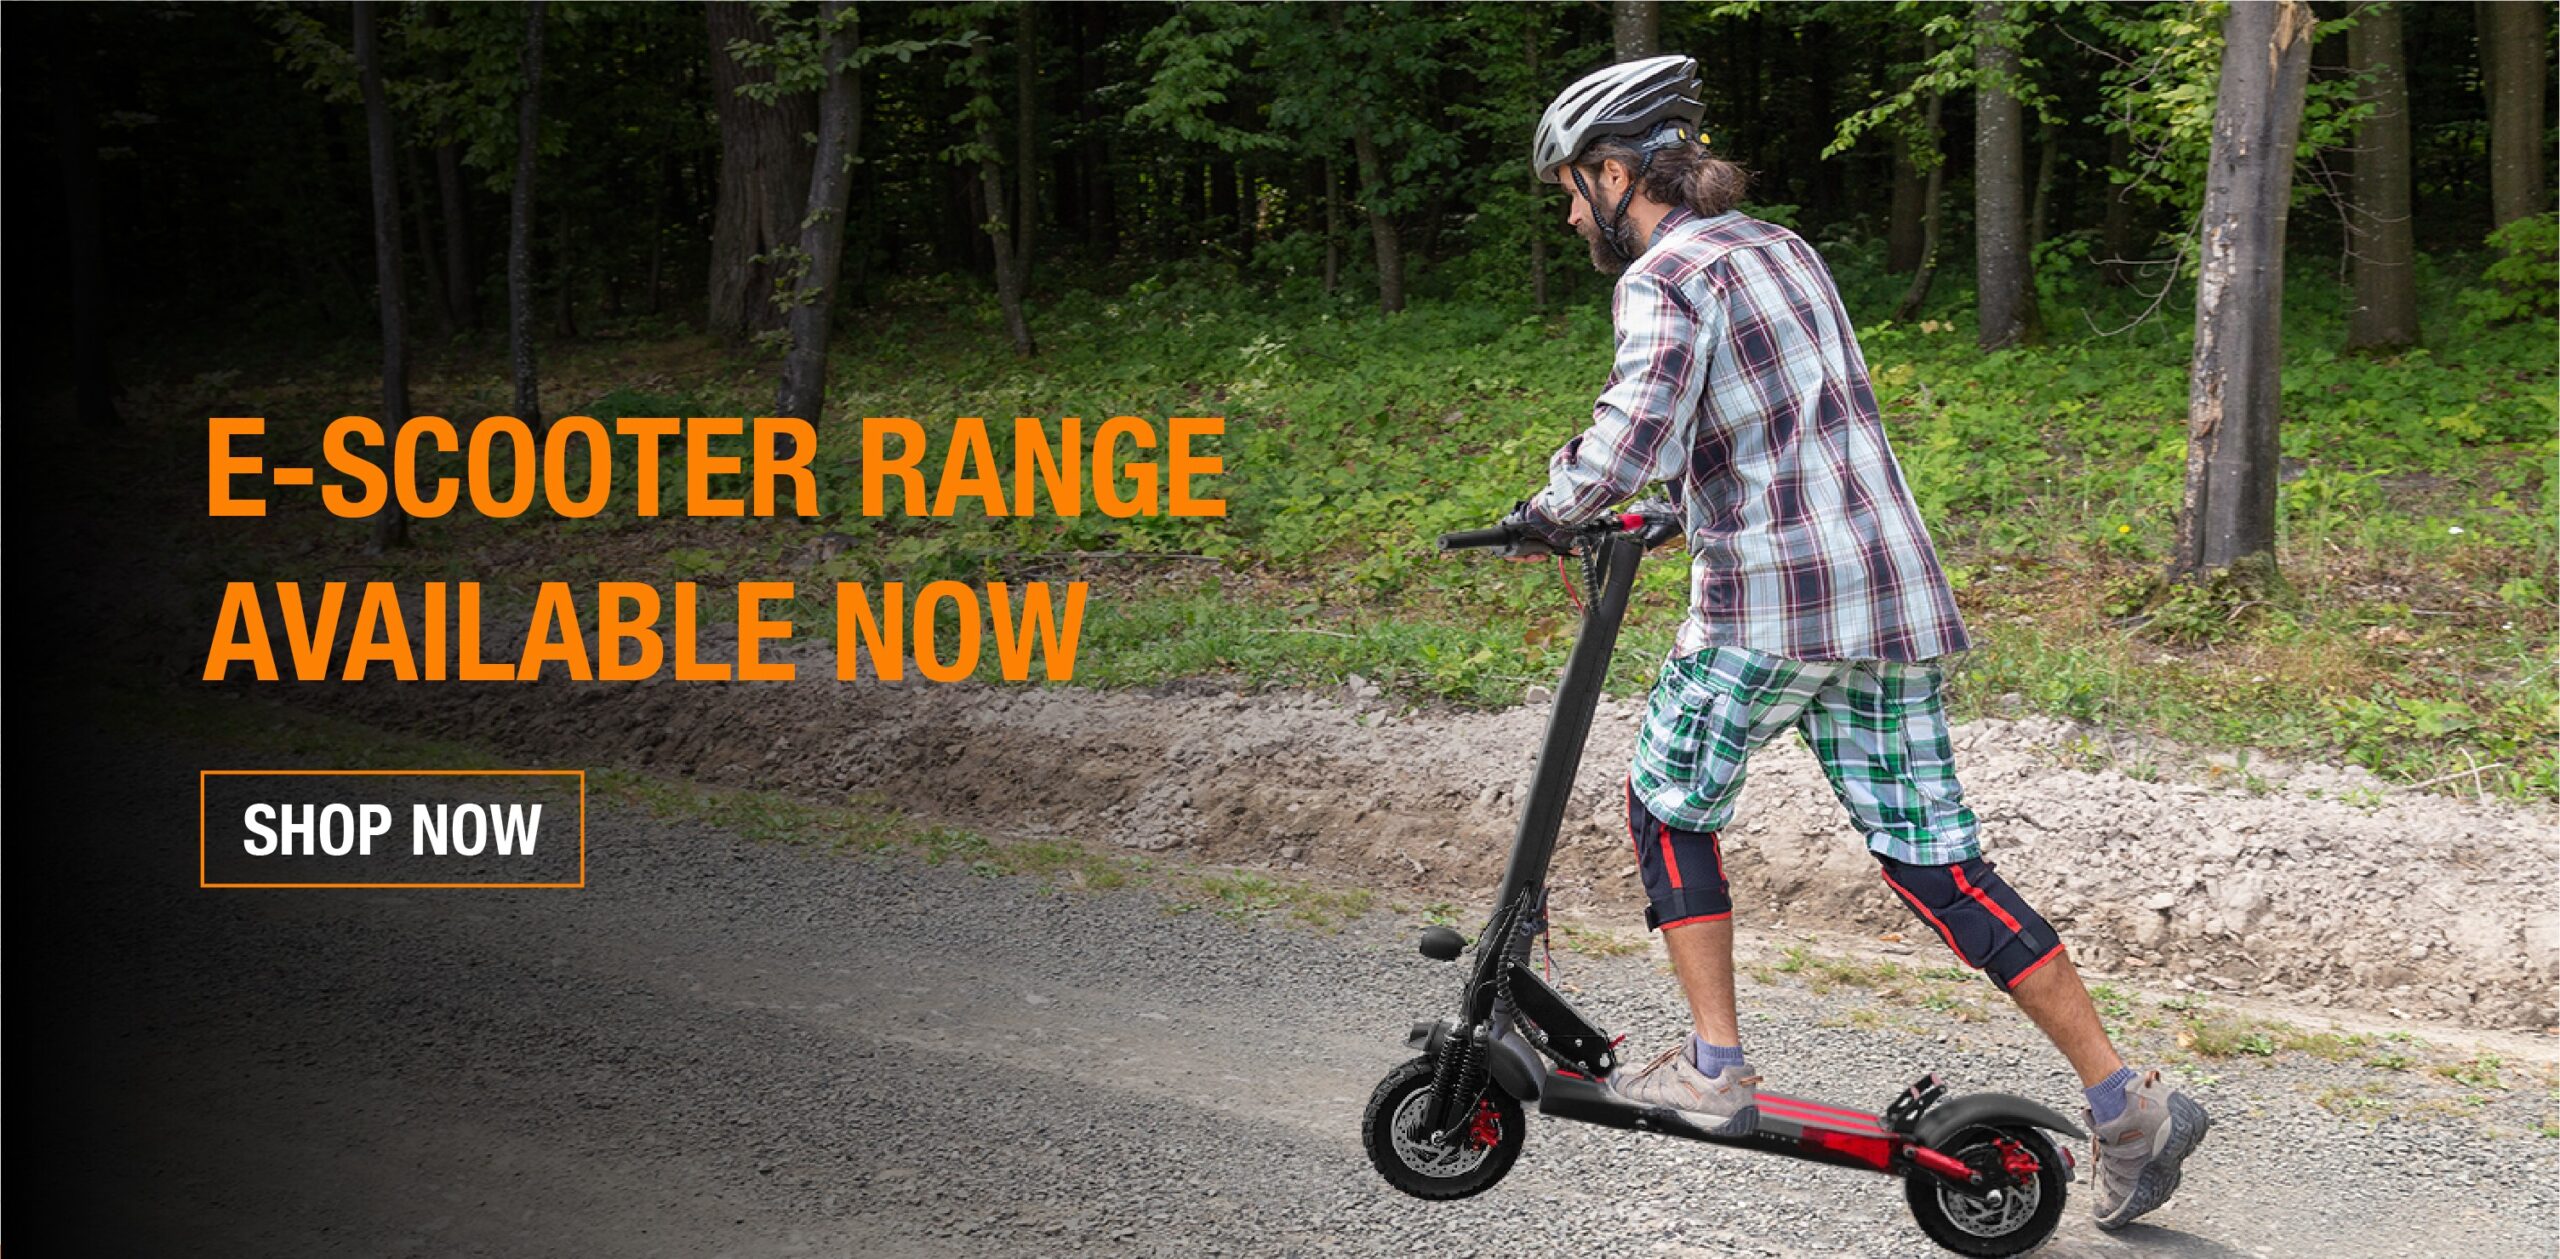 E-Scooter Range, Available Now